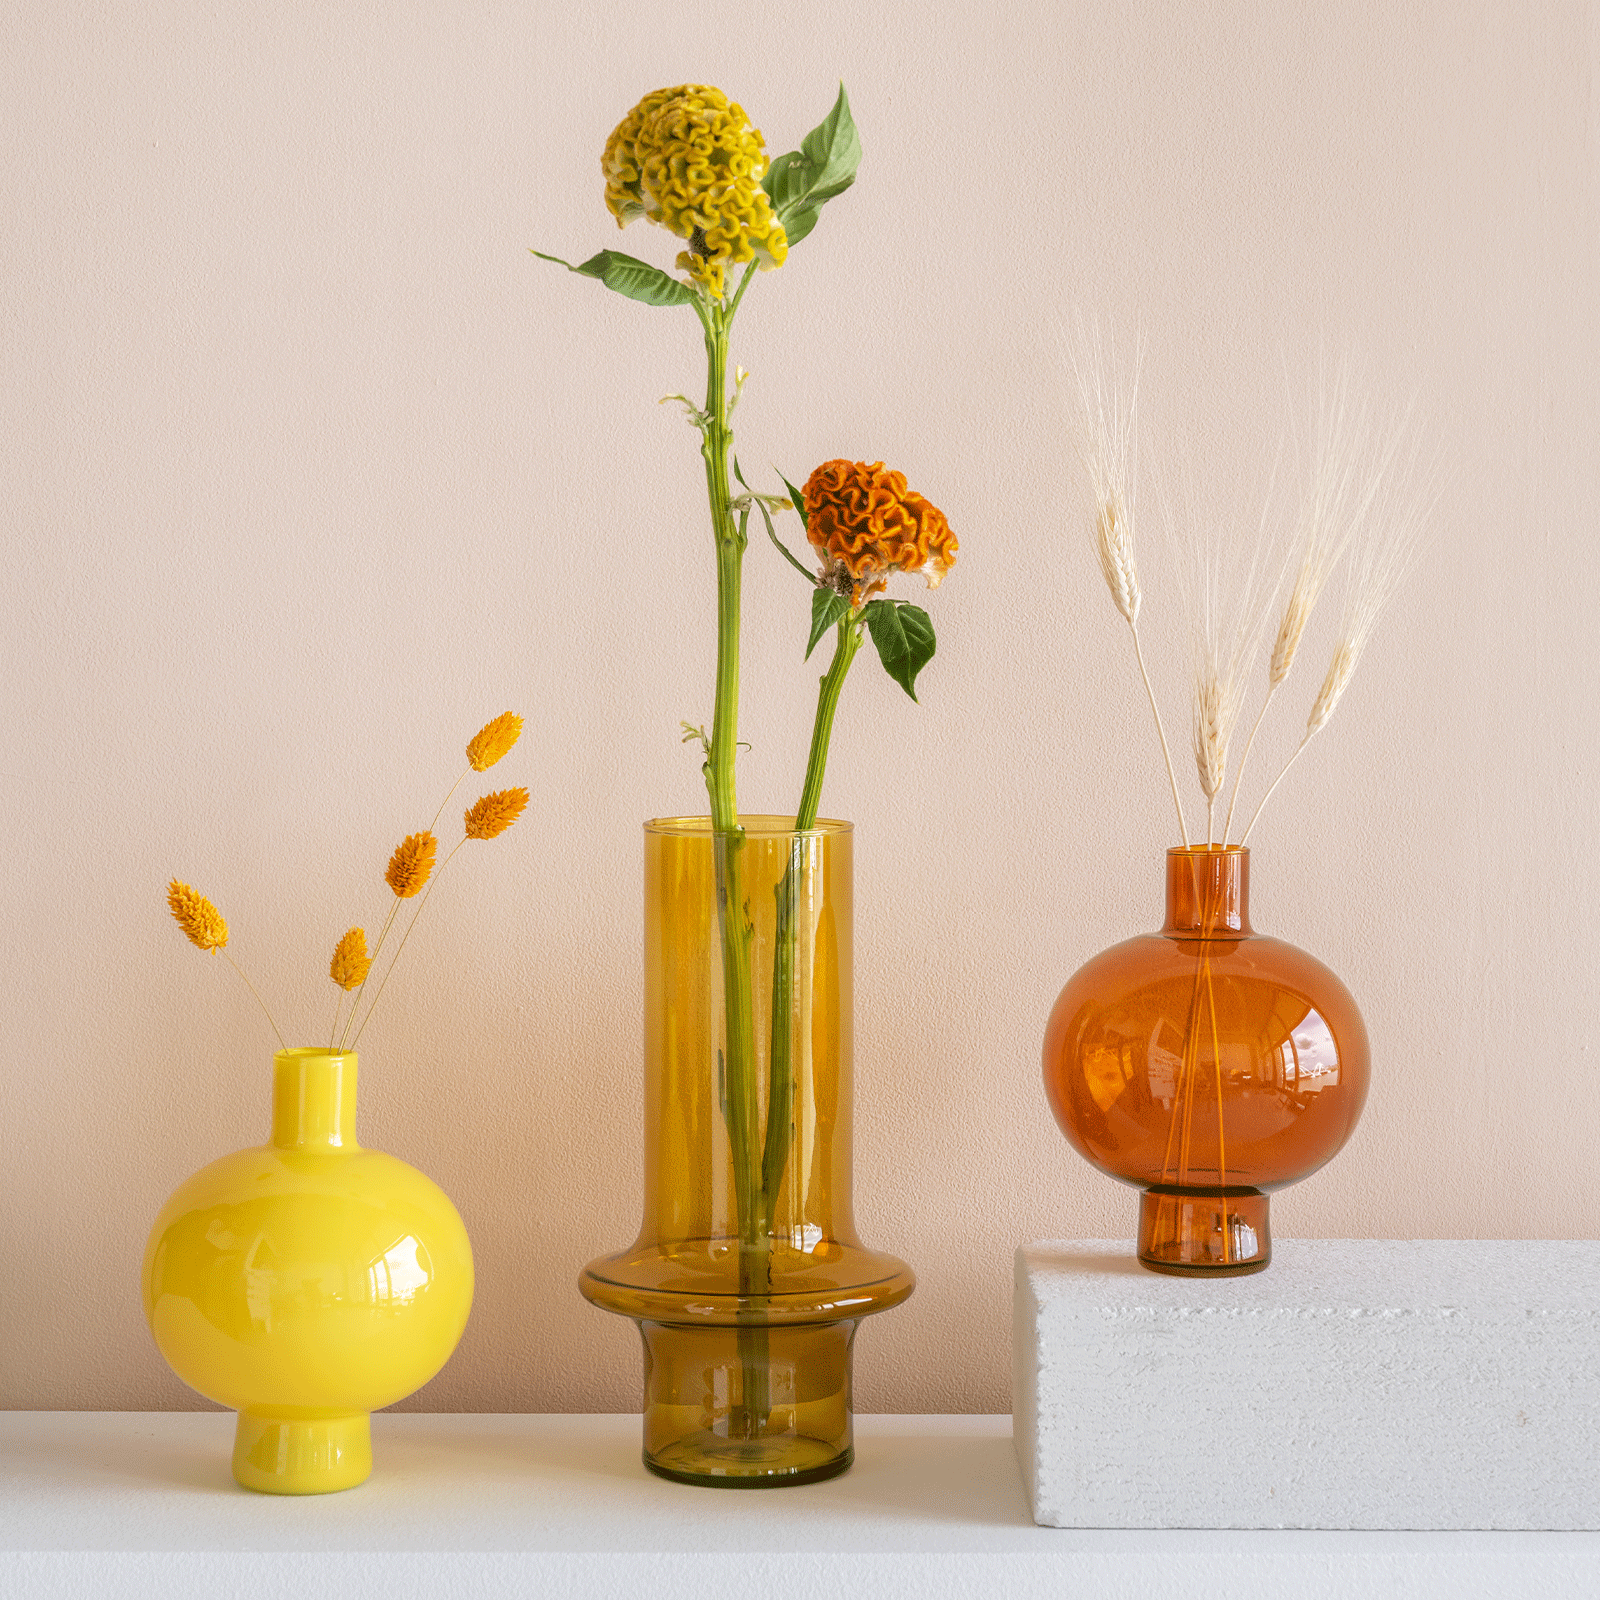 Yellow Recycled glass Cylinder Vase